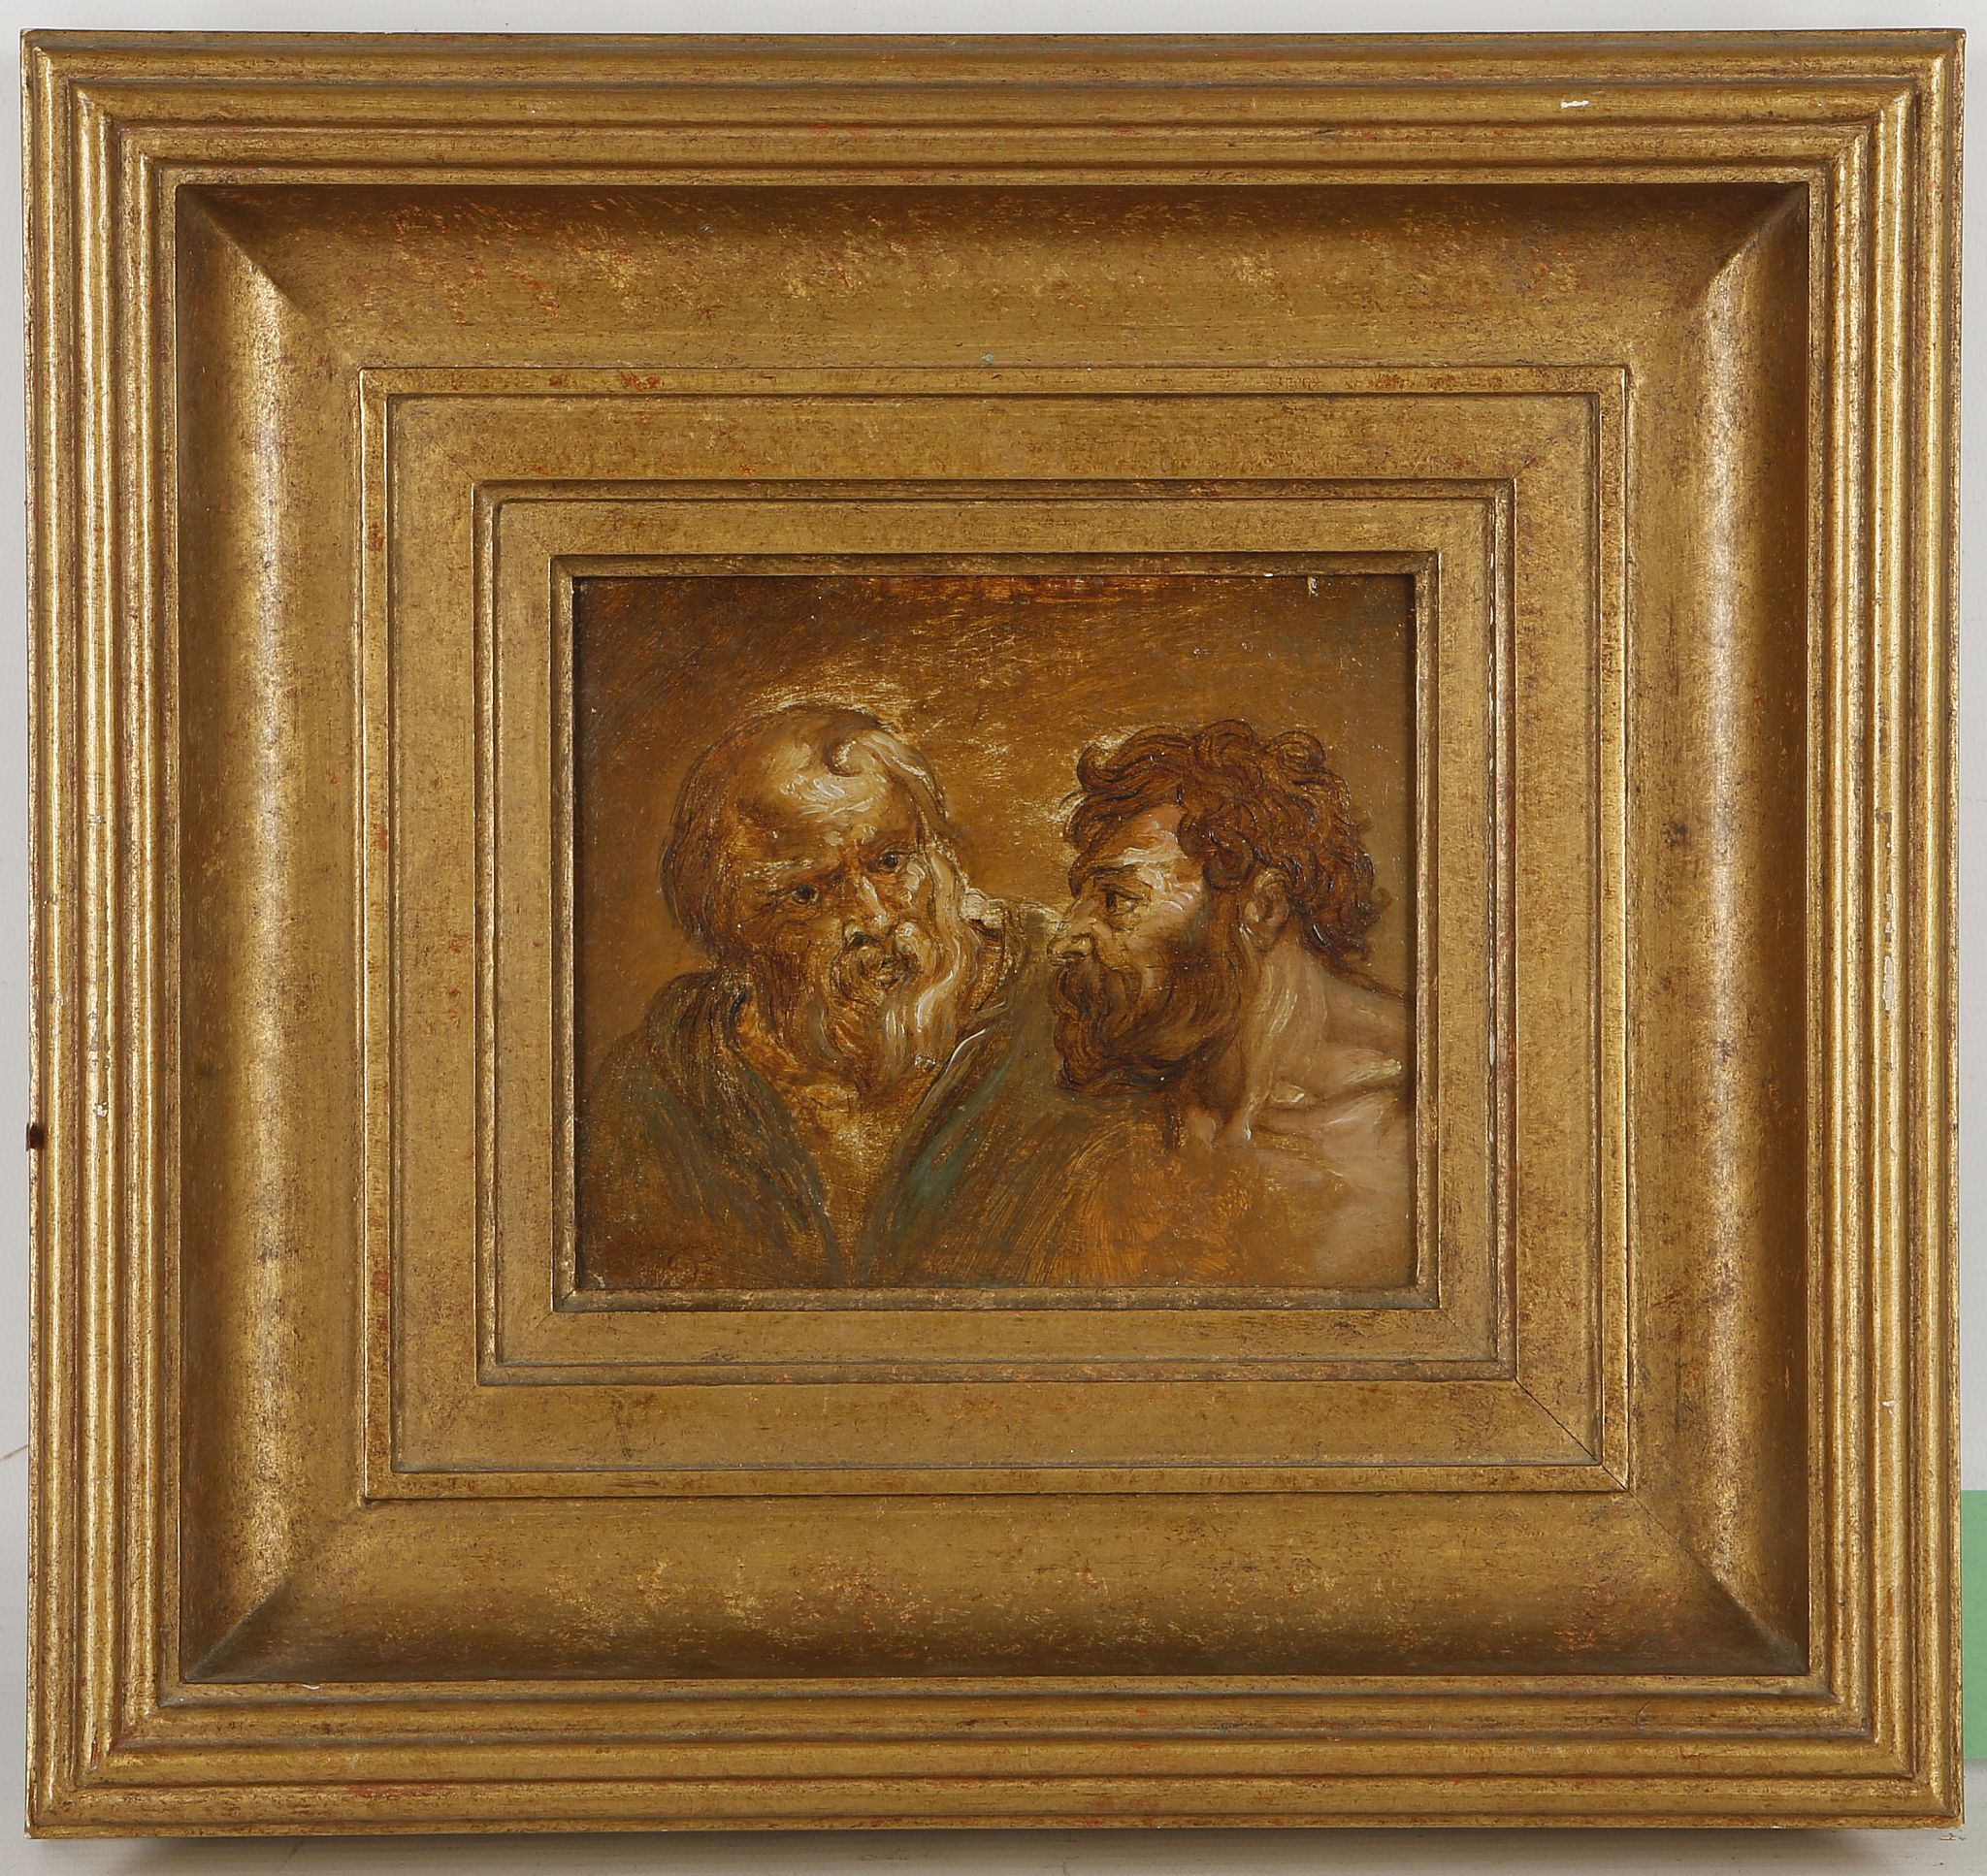 Circa 18th century. Oil on card laid to panel, study of two scholars. Monogrammed lower left. In a